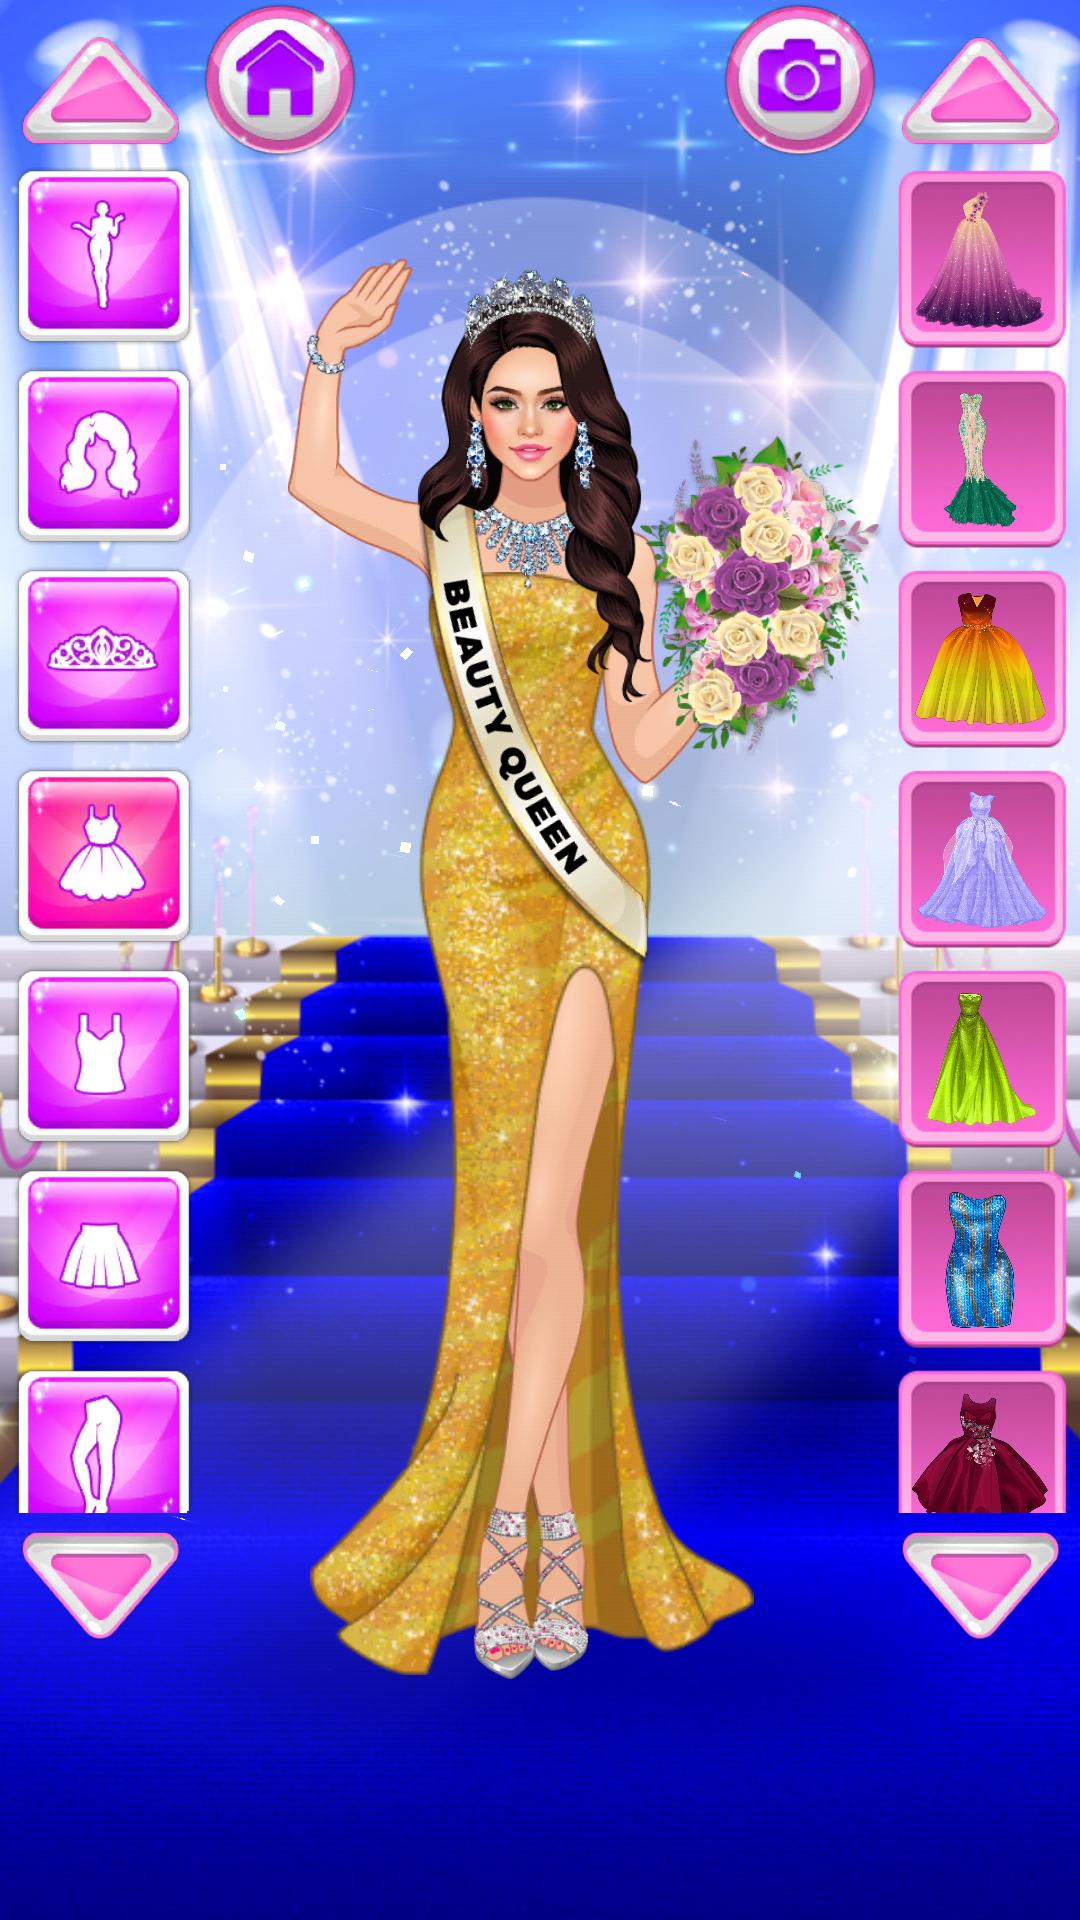 Dress Up Games for Android - APK Download